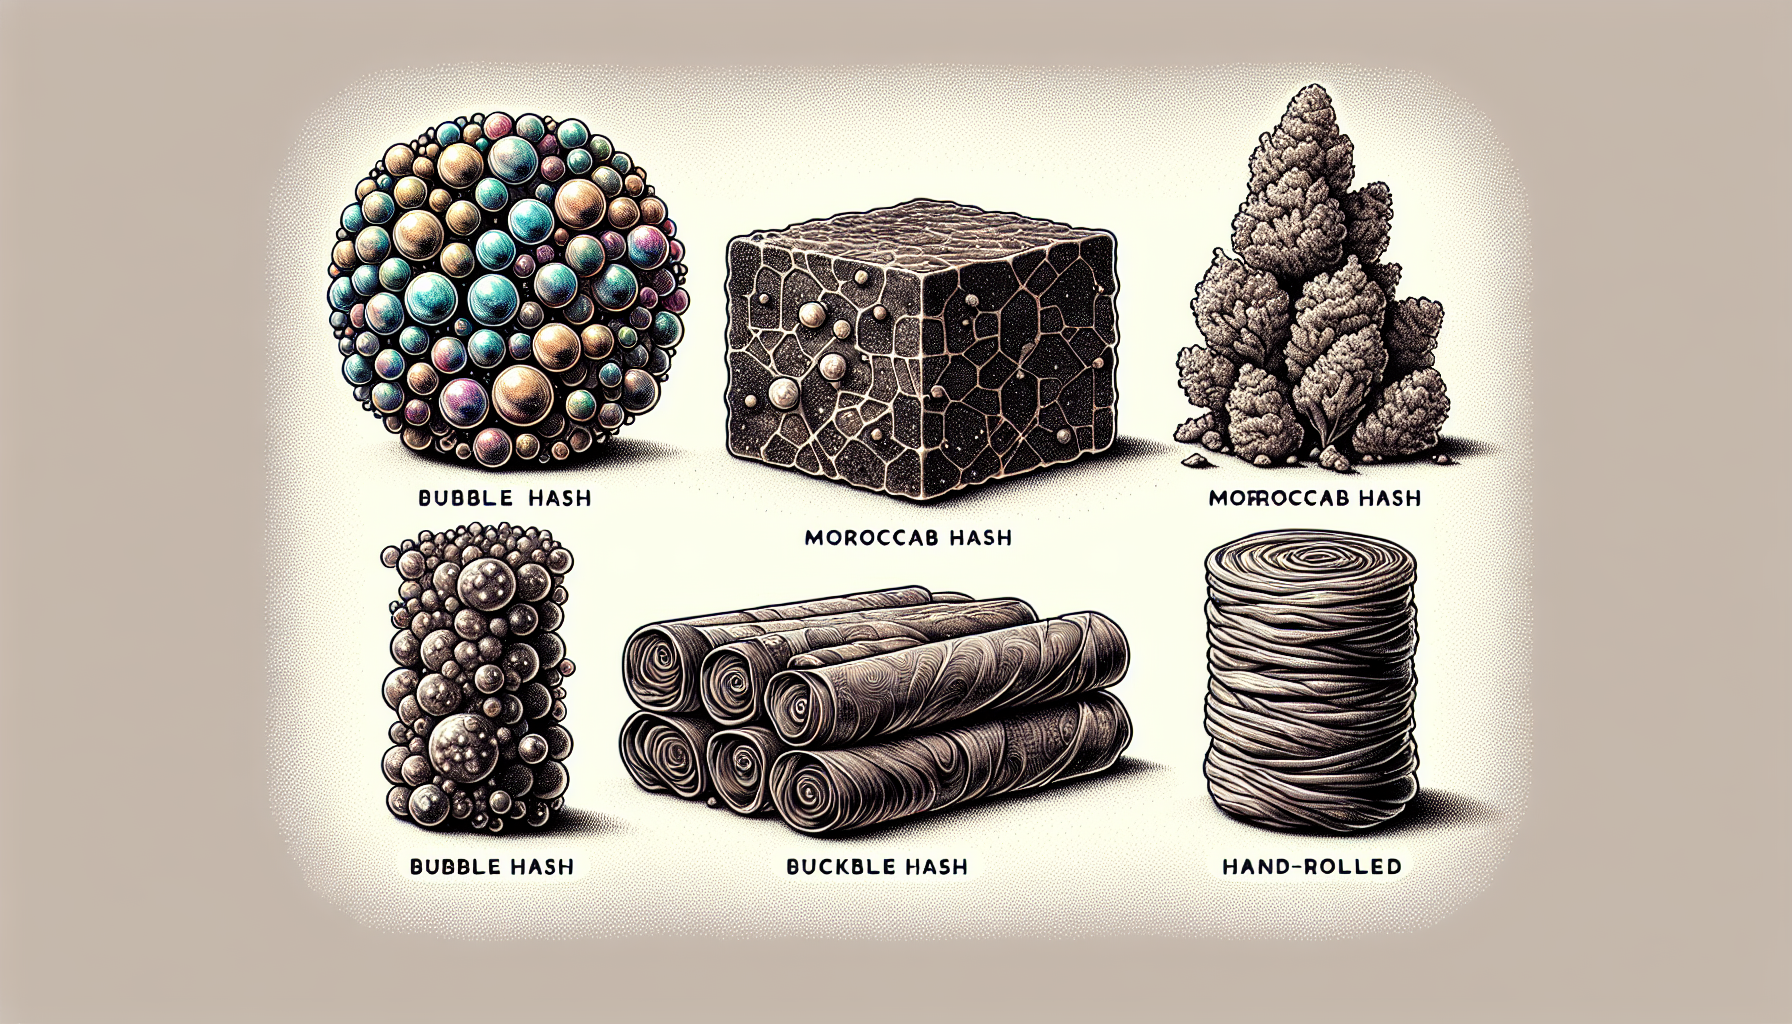 Various types of high-quality hash products